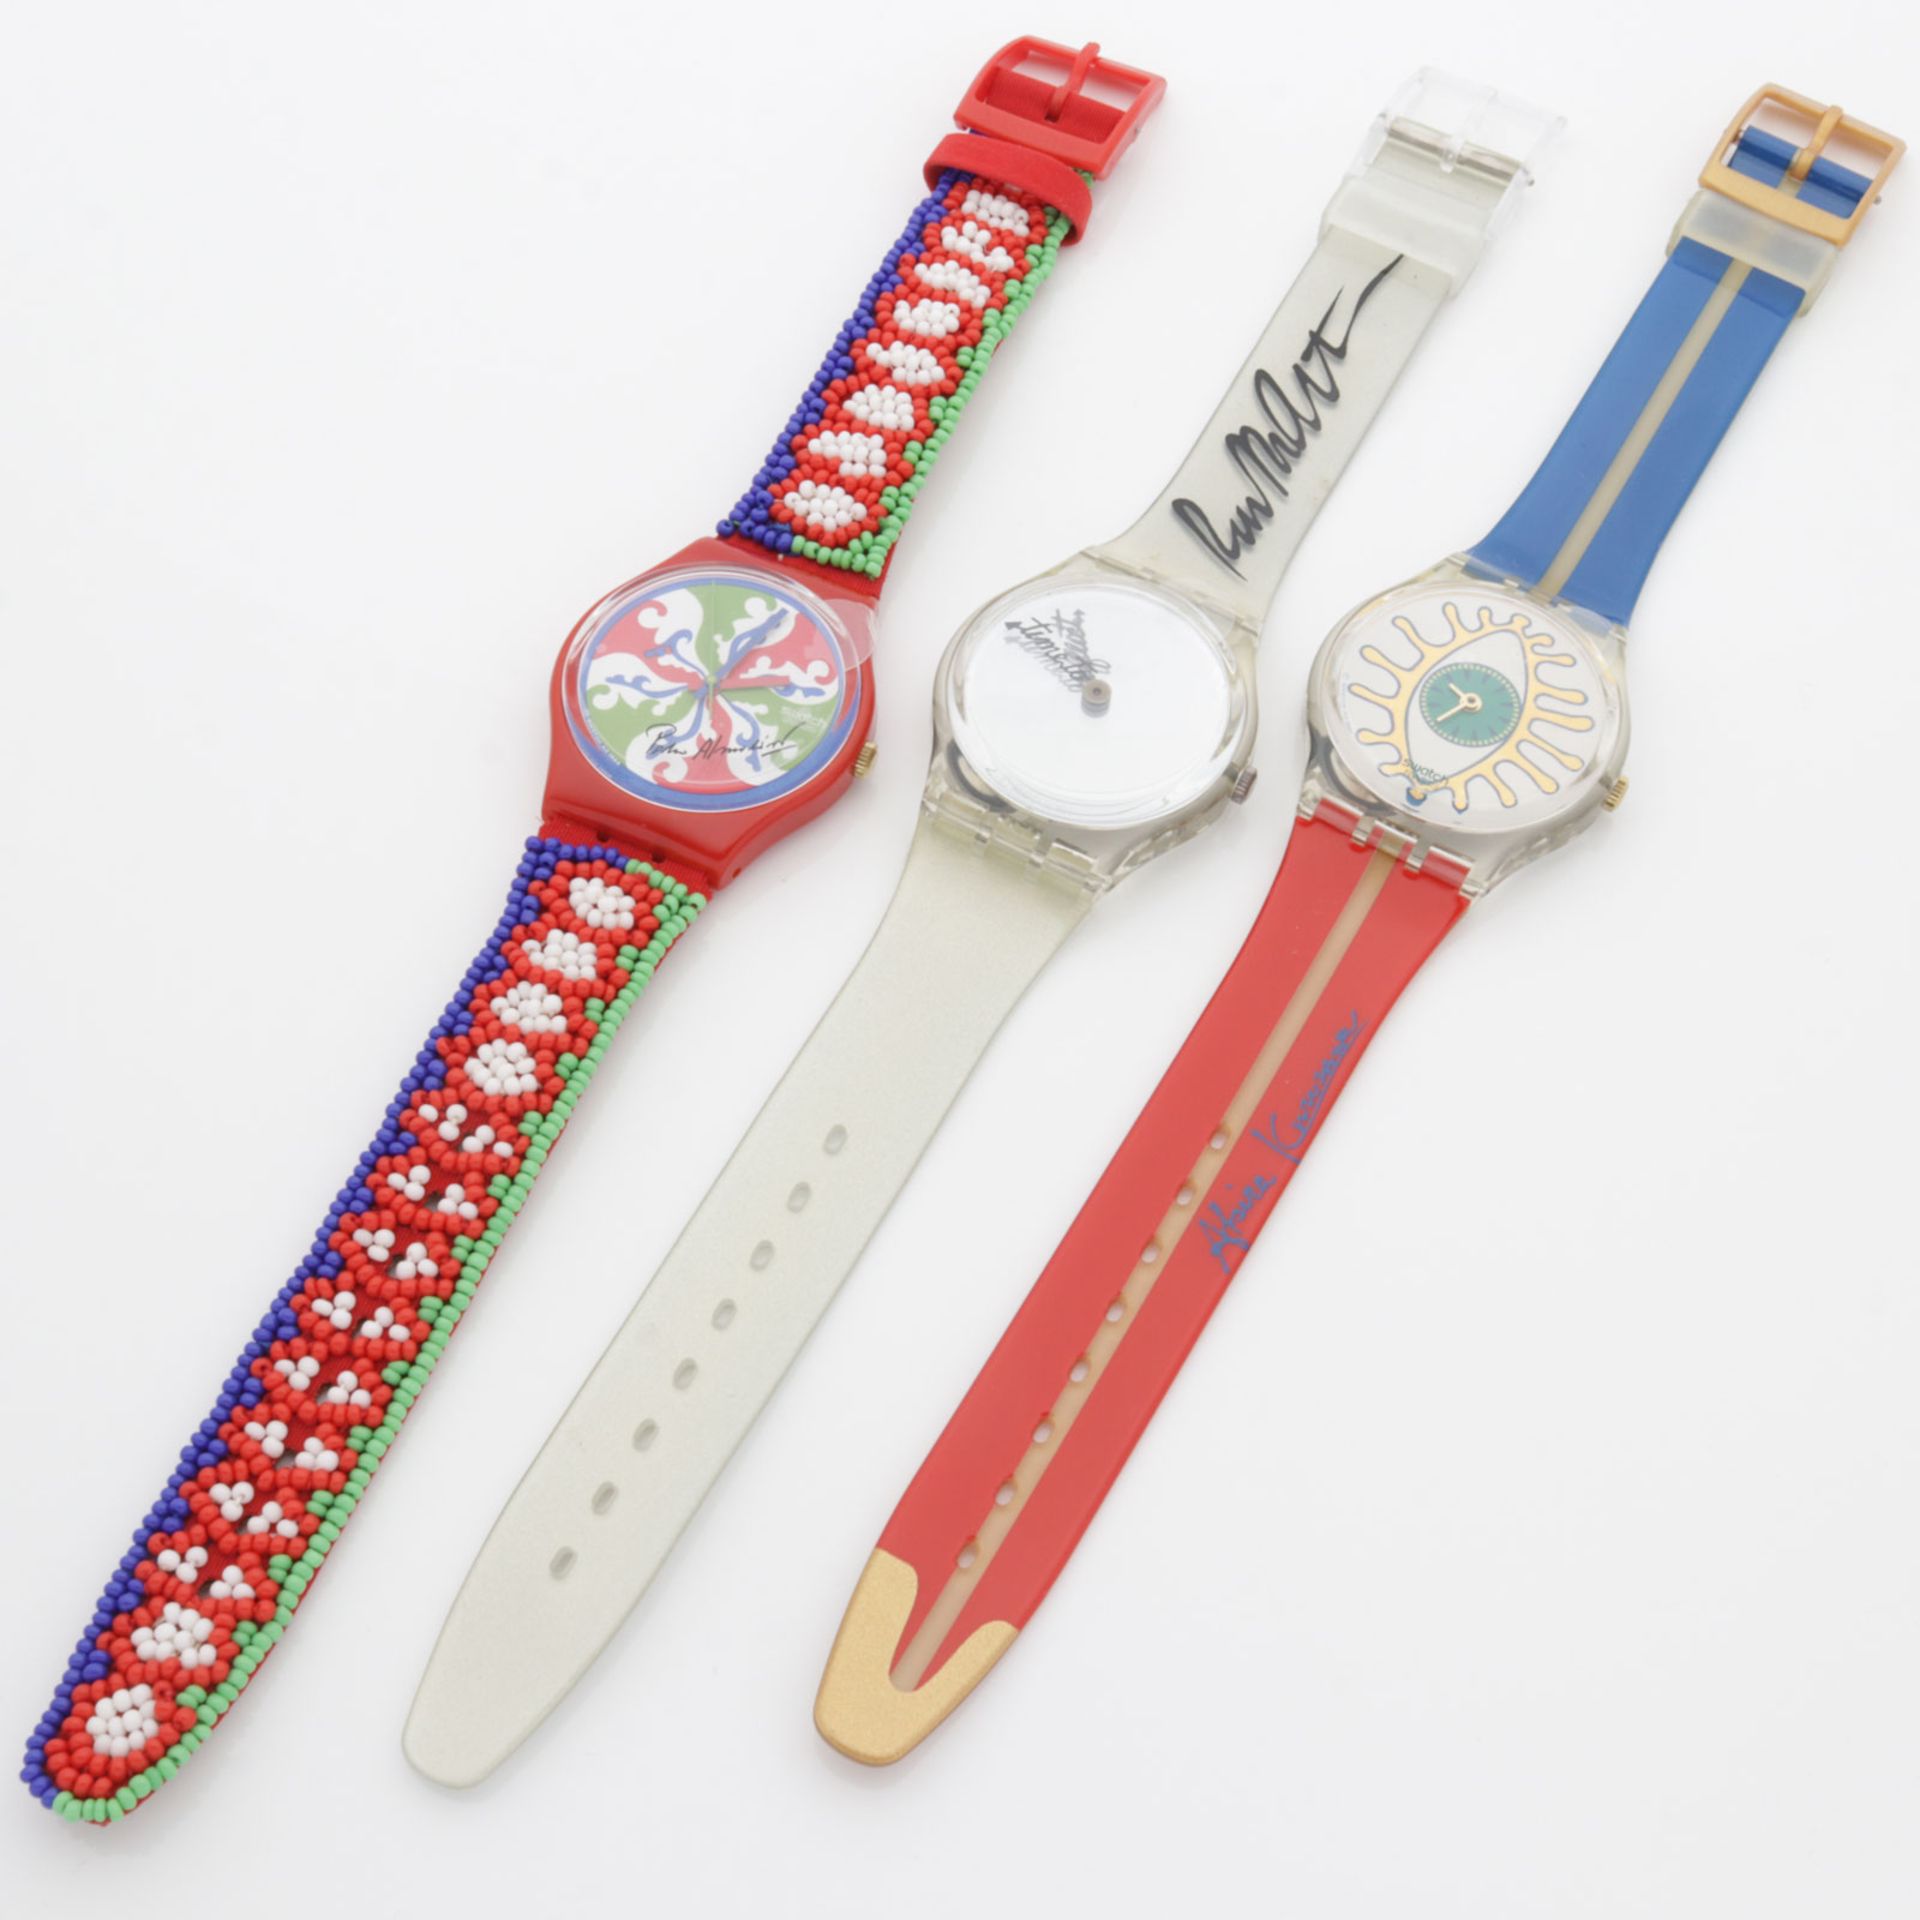 Swatch - Sonderedition - Image 3 of 17